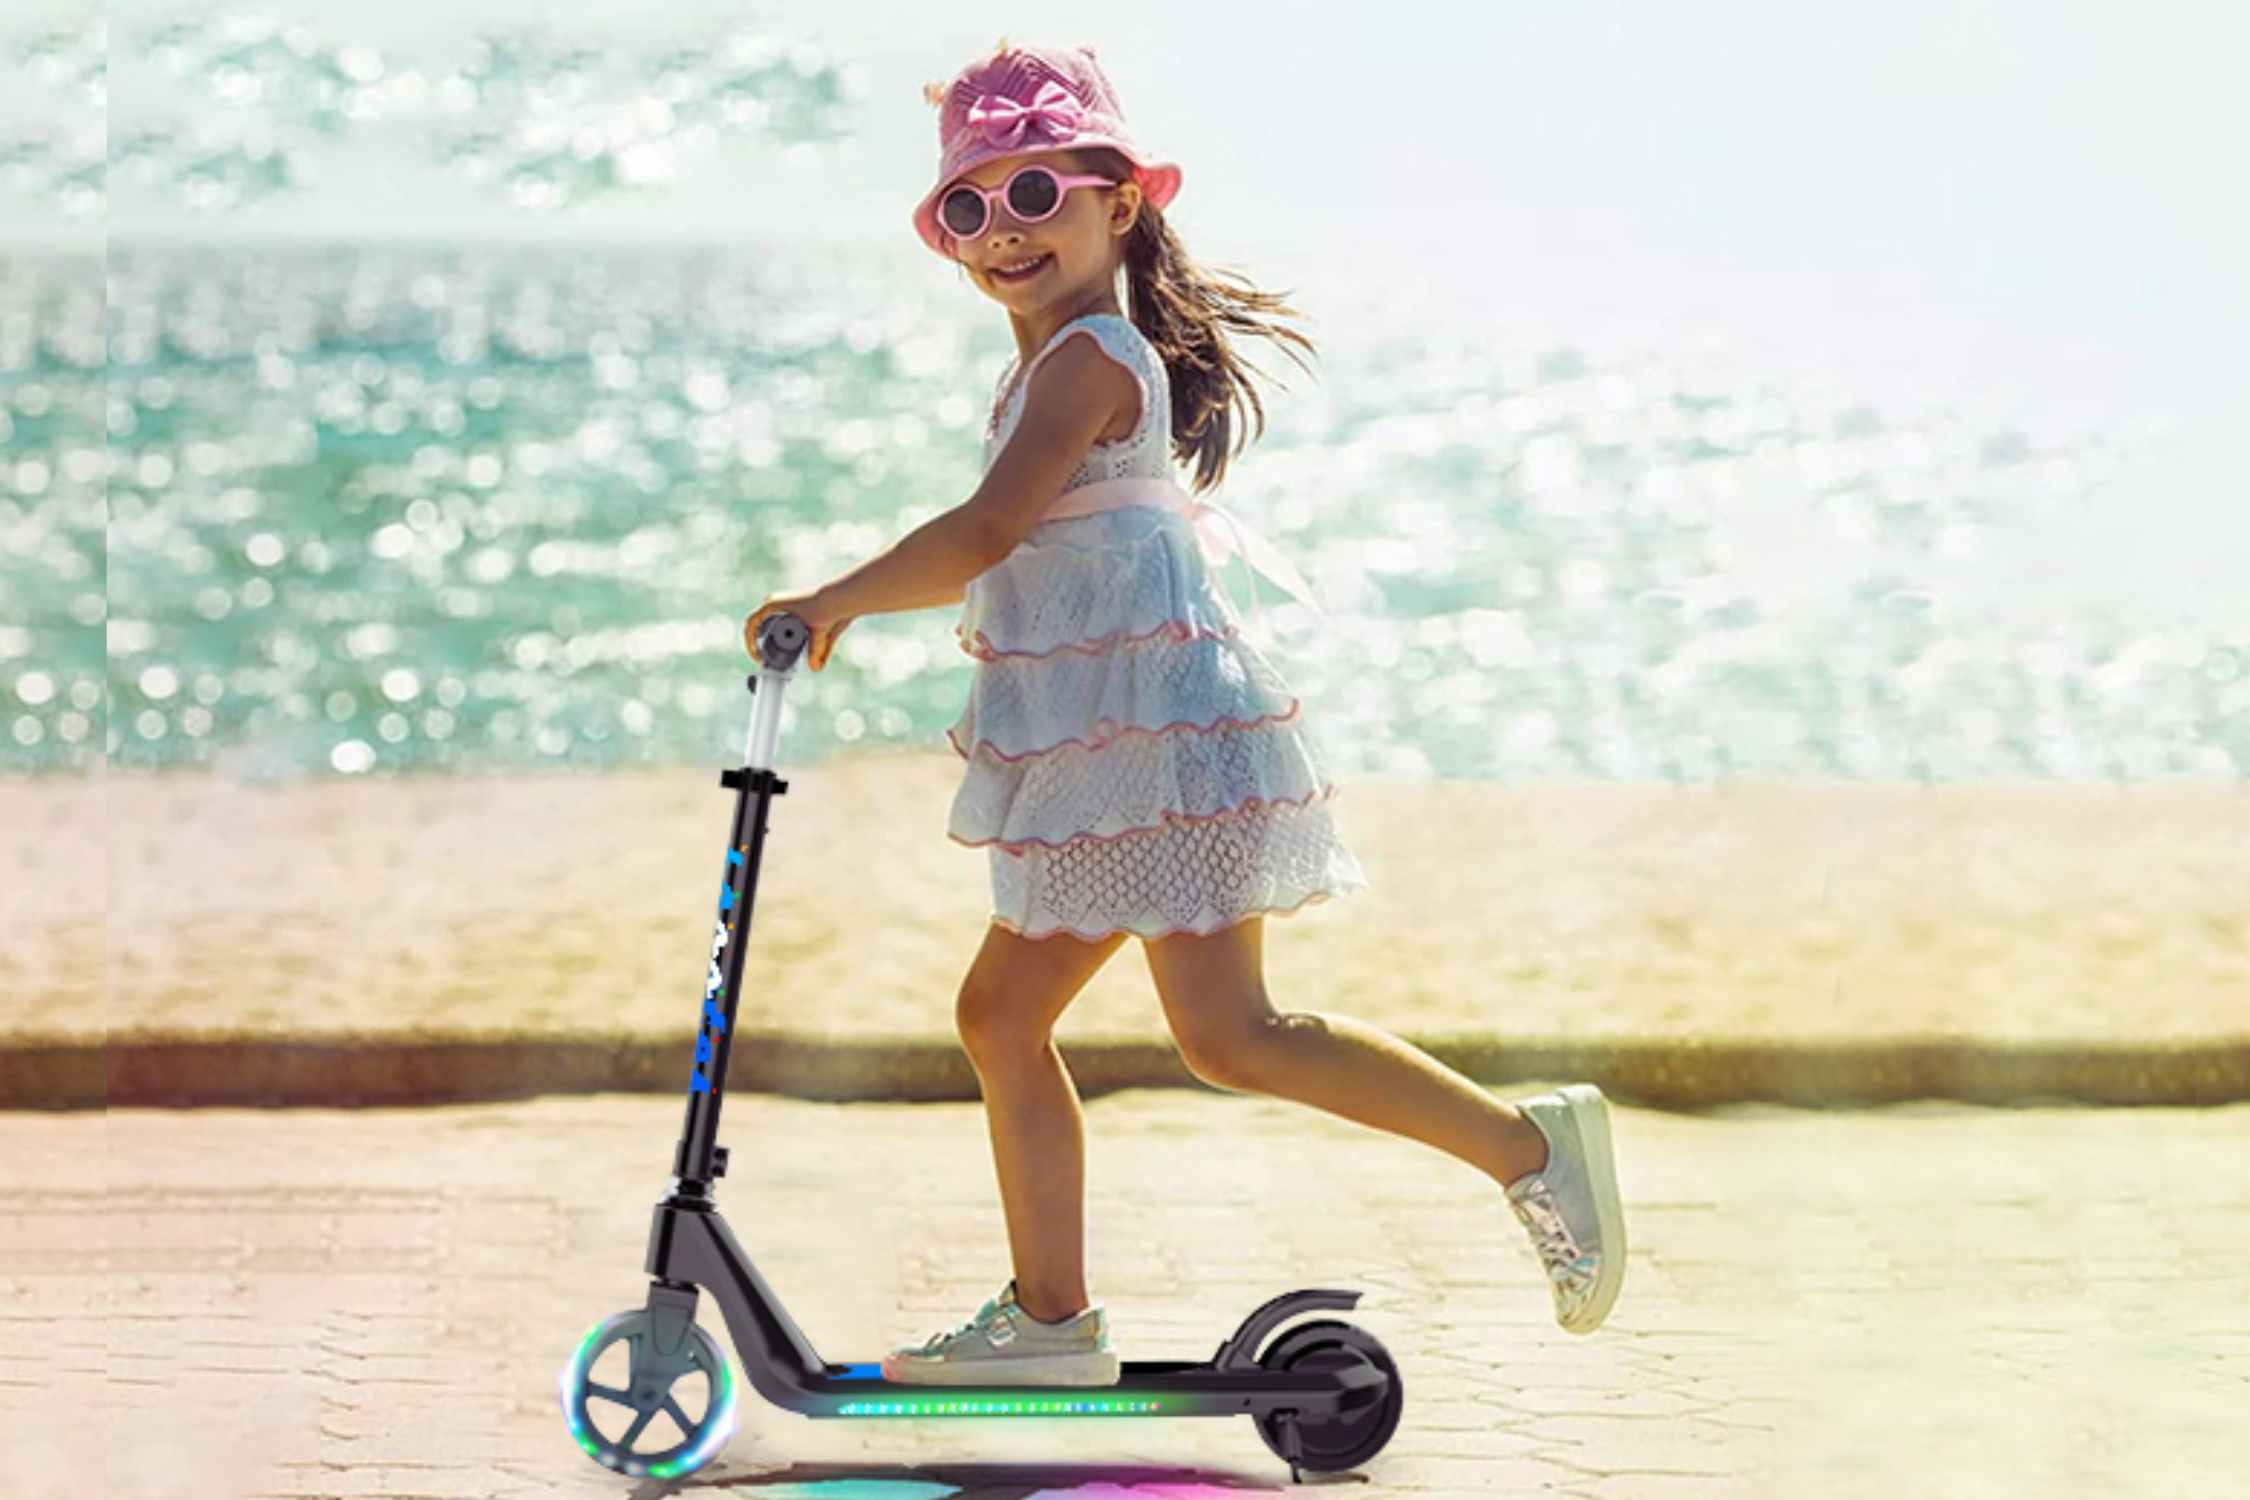 Limited-Time Offer: Kids' Electric Scooter, $69.82 on Amazon